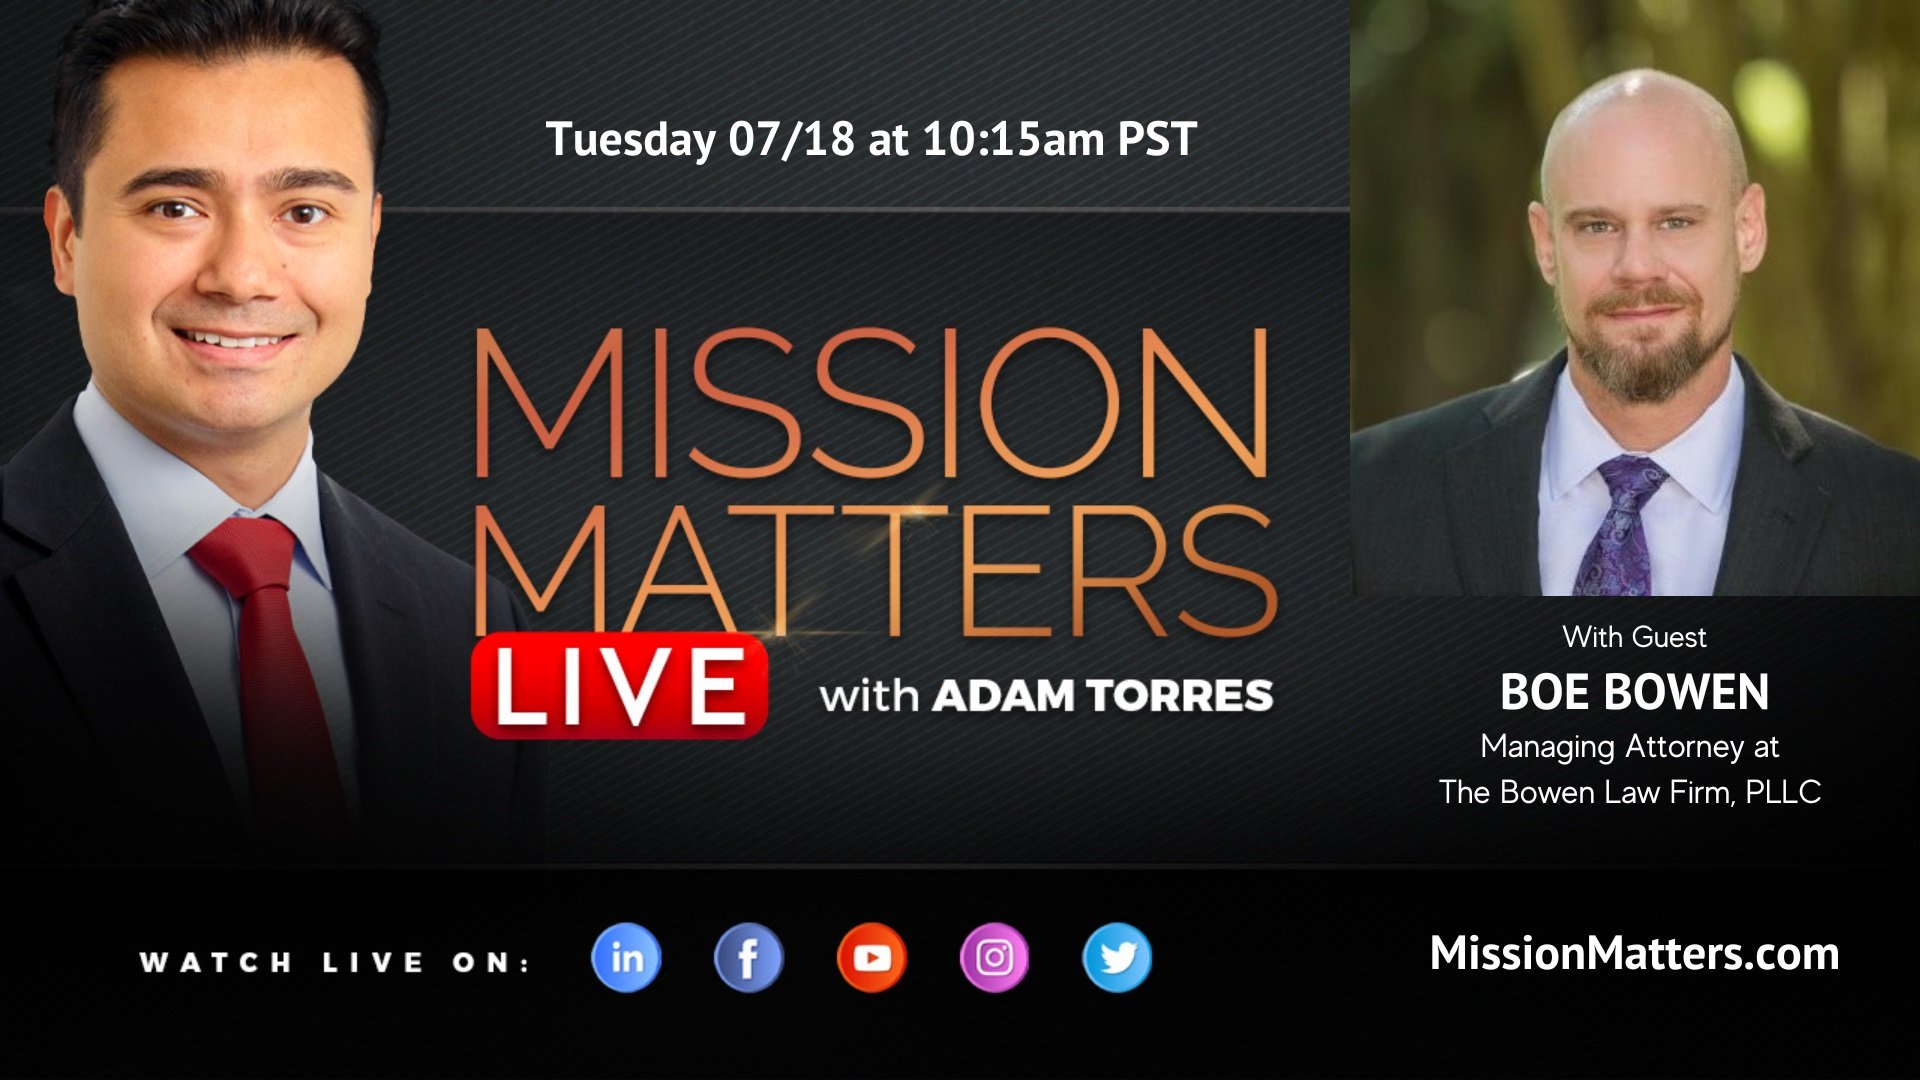 Tuesday 07/18 Mission Matters Live with Adam Torres With Guest Boe Bowen Managing Attorney at The Bowen Law Firm, PLLC